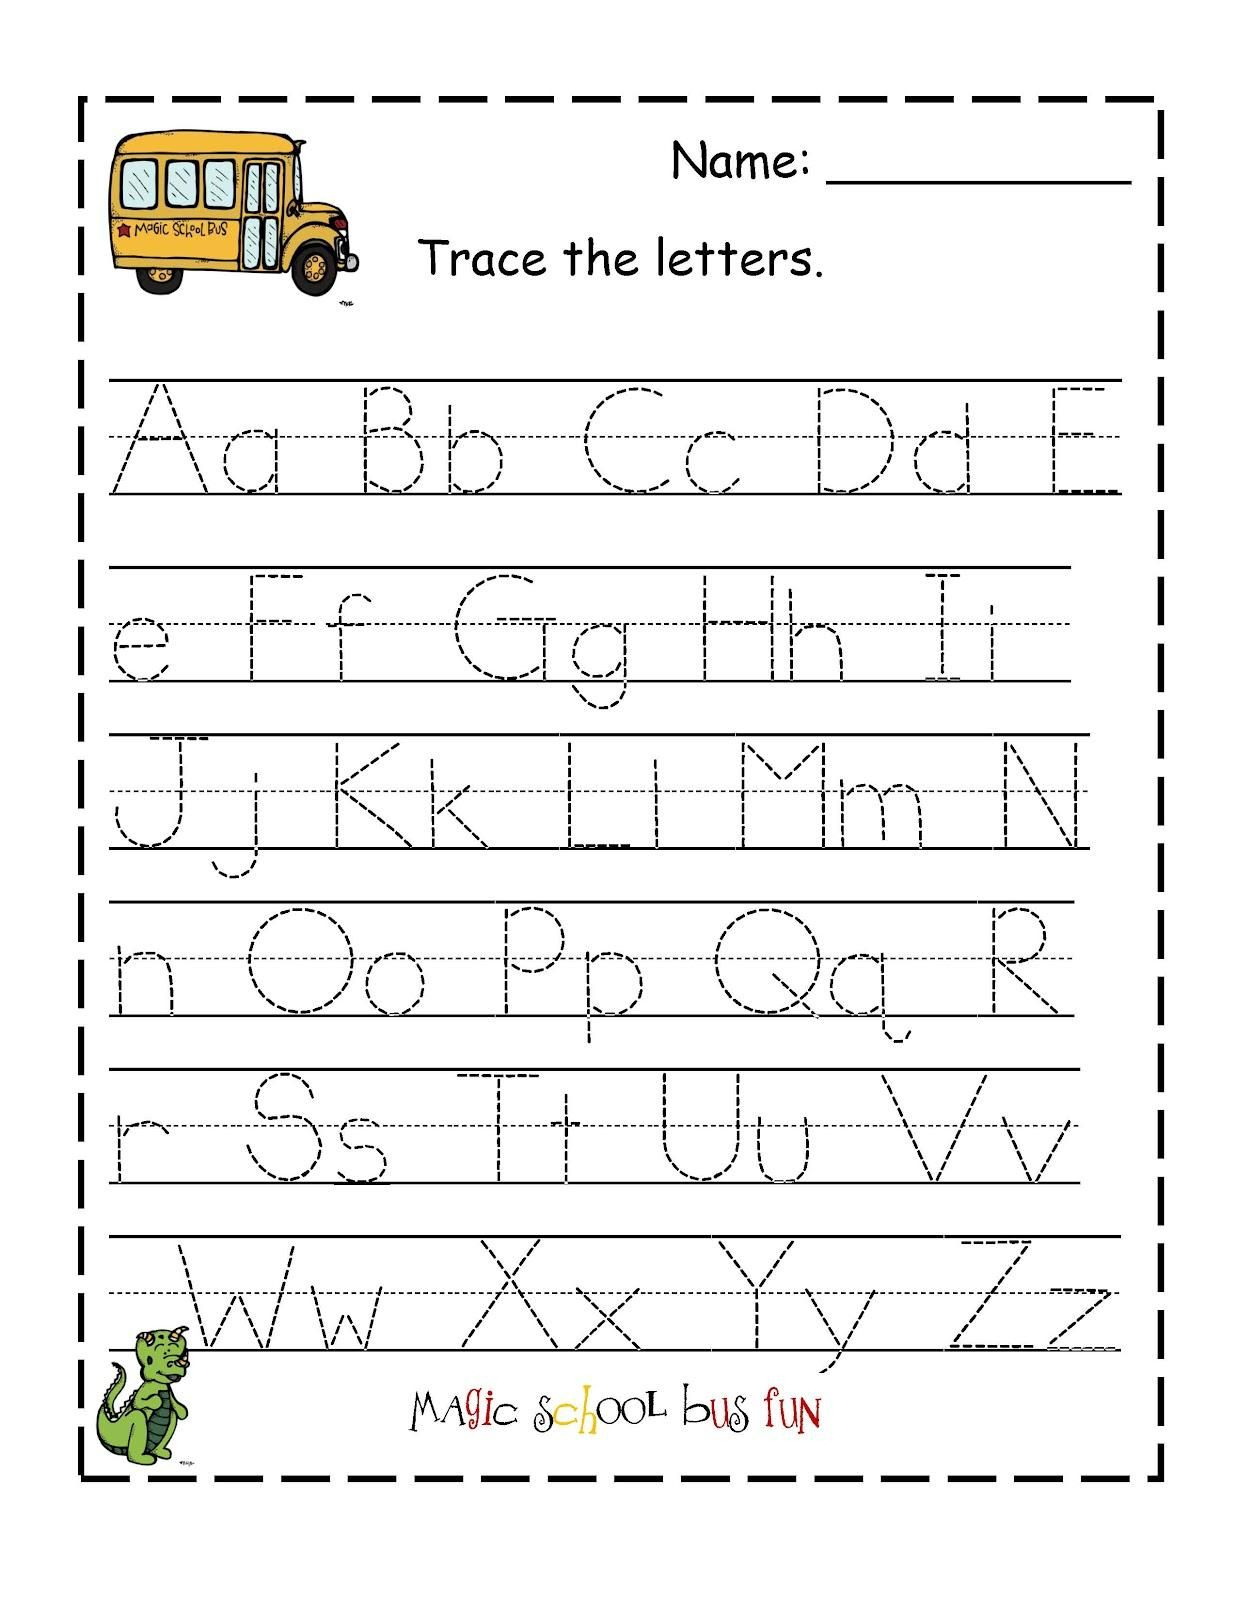 Free Printable Abc Tracing Worksheets #2 | Places To Visit - Free | Free Printable Tracing Worksheets